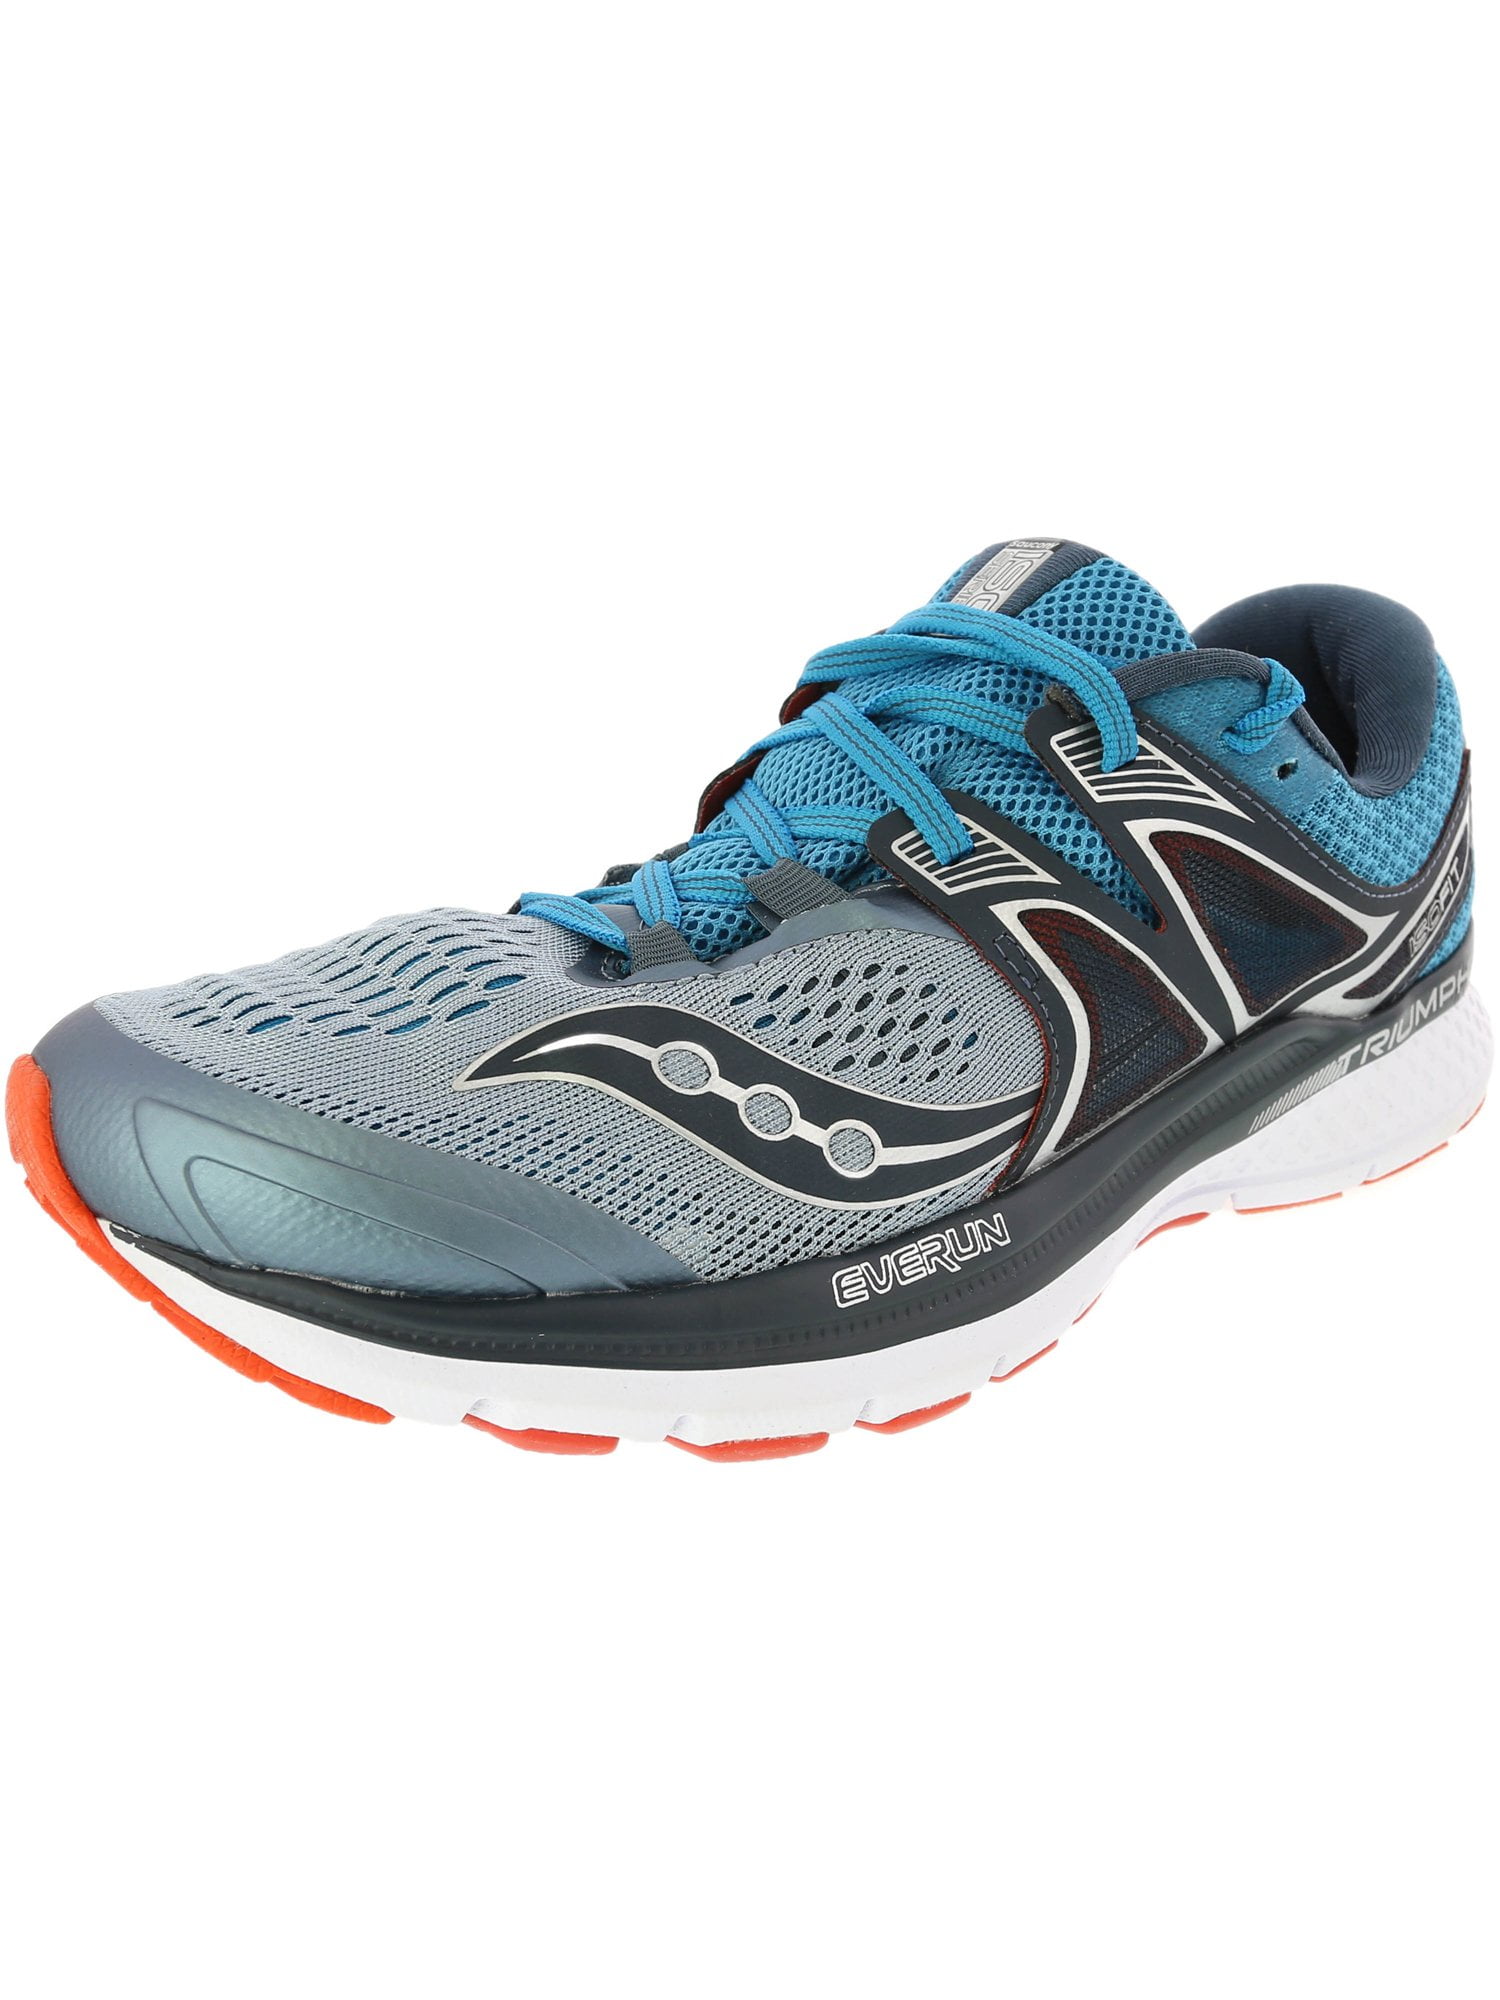 saucony zealot iso mens shoes greybluered